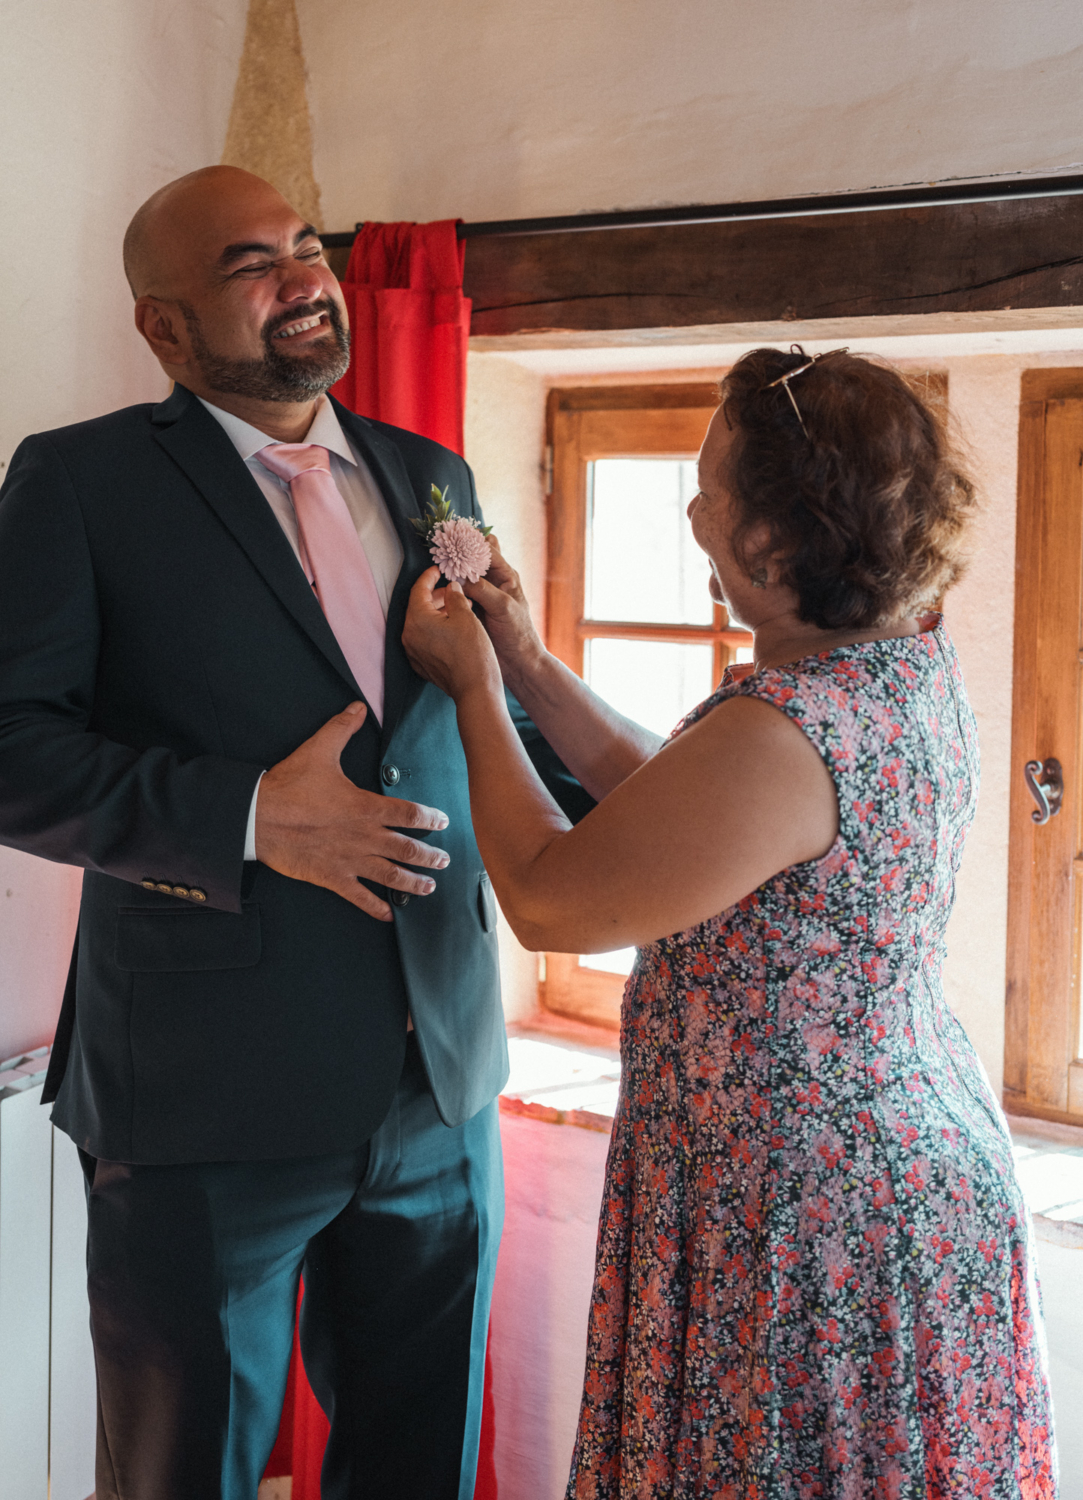 mother pins flower to grooms suit before wedding